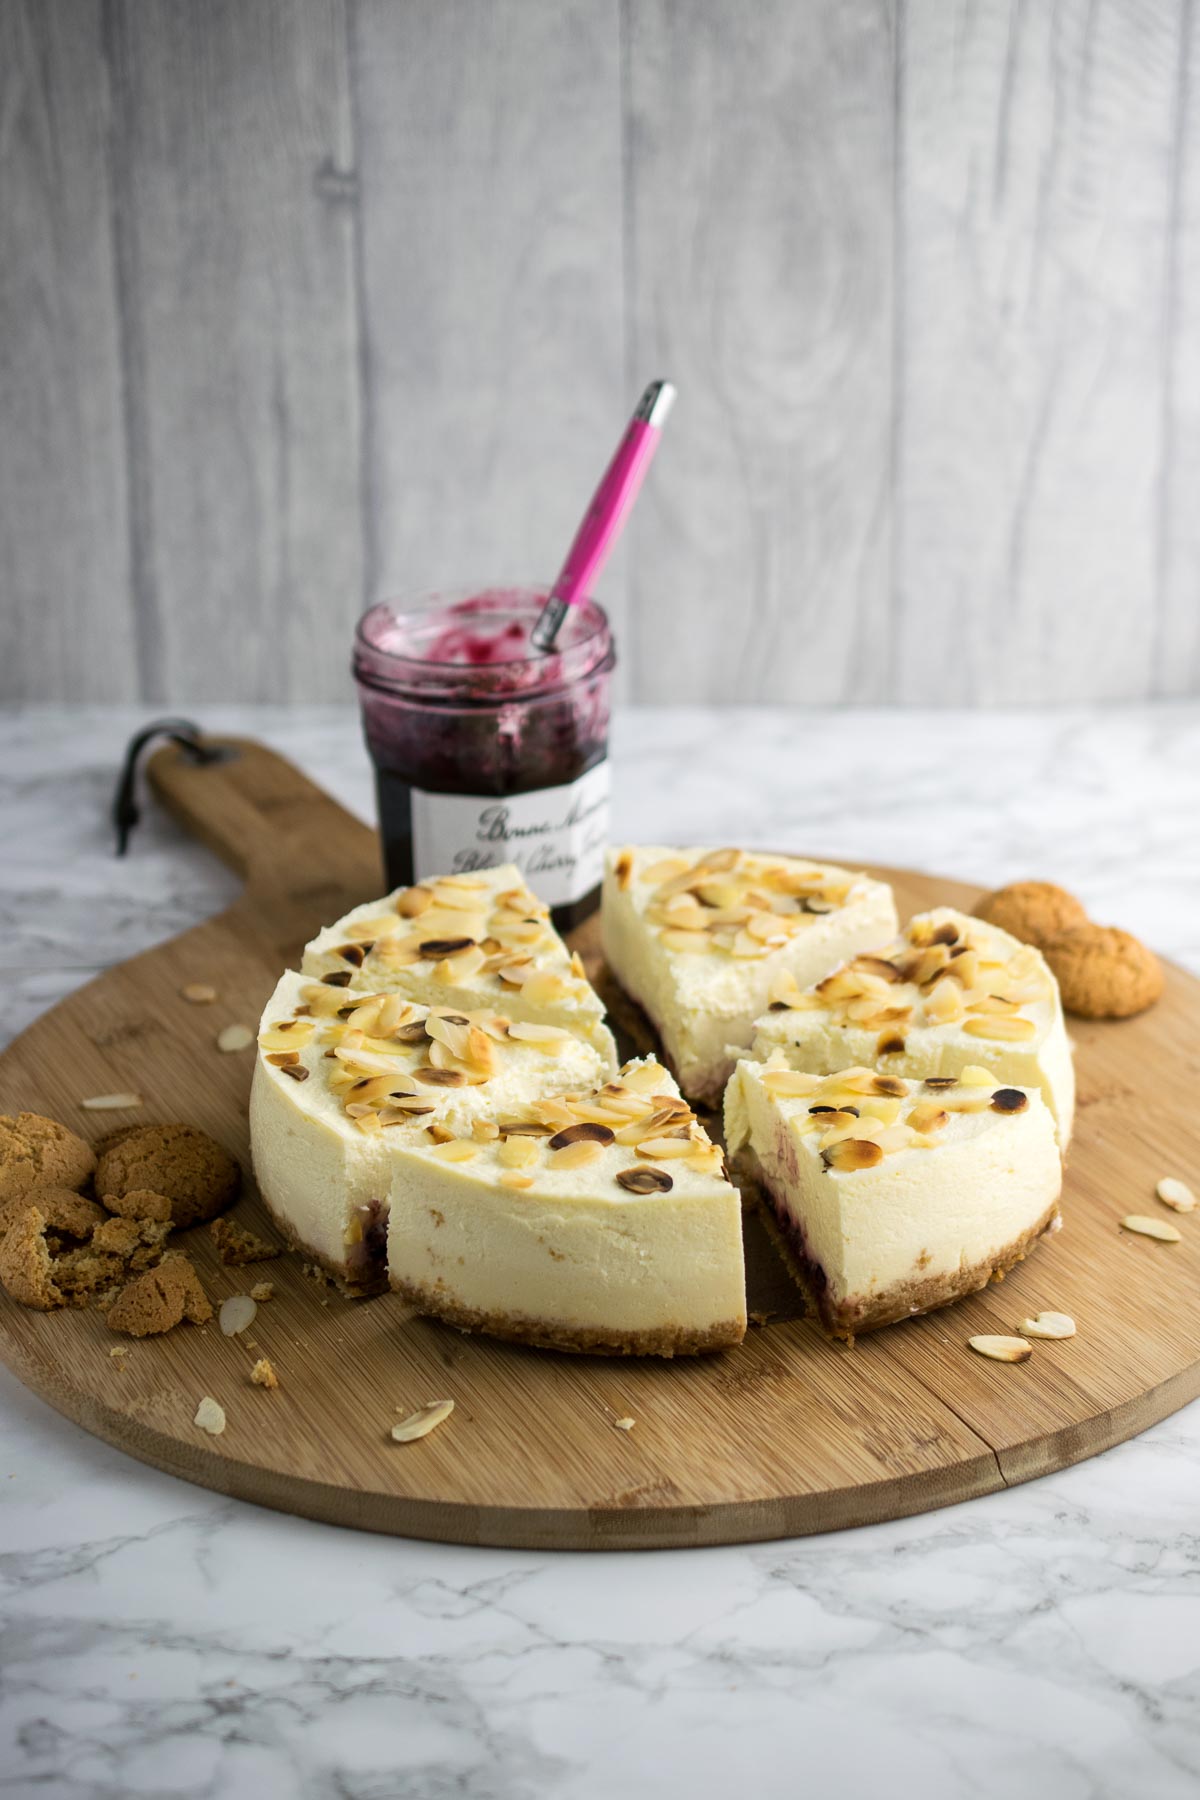 Instant Pot Bakewell Cheesecake. Amaretti and digestive biscuit base with cherry conserve, almond flavoured cheesecake topped with toasted flaked almonds.